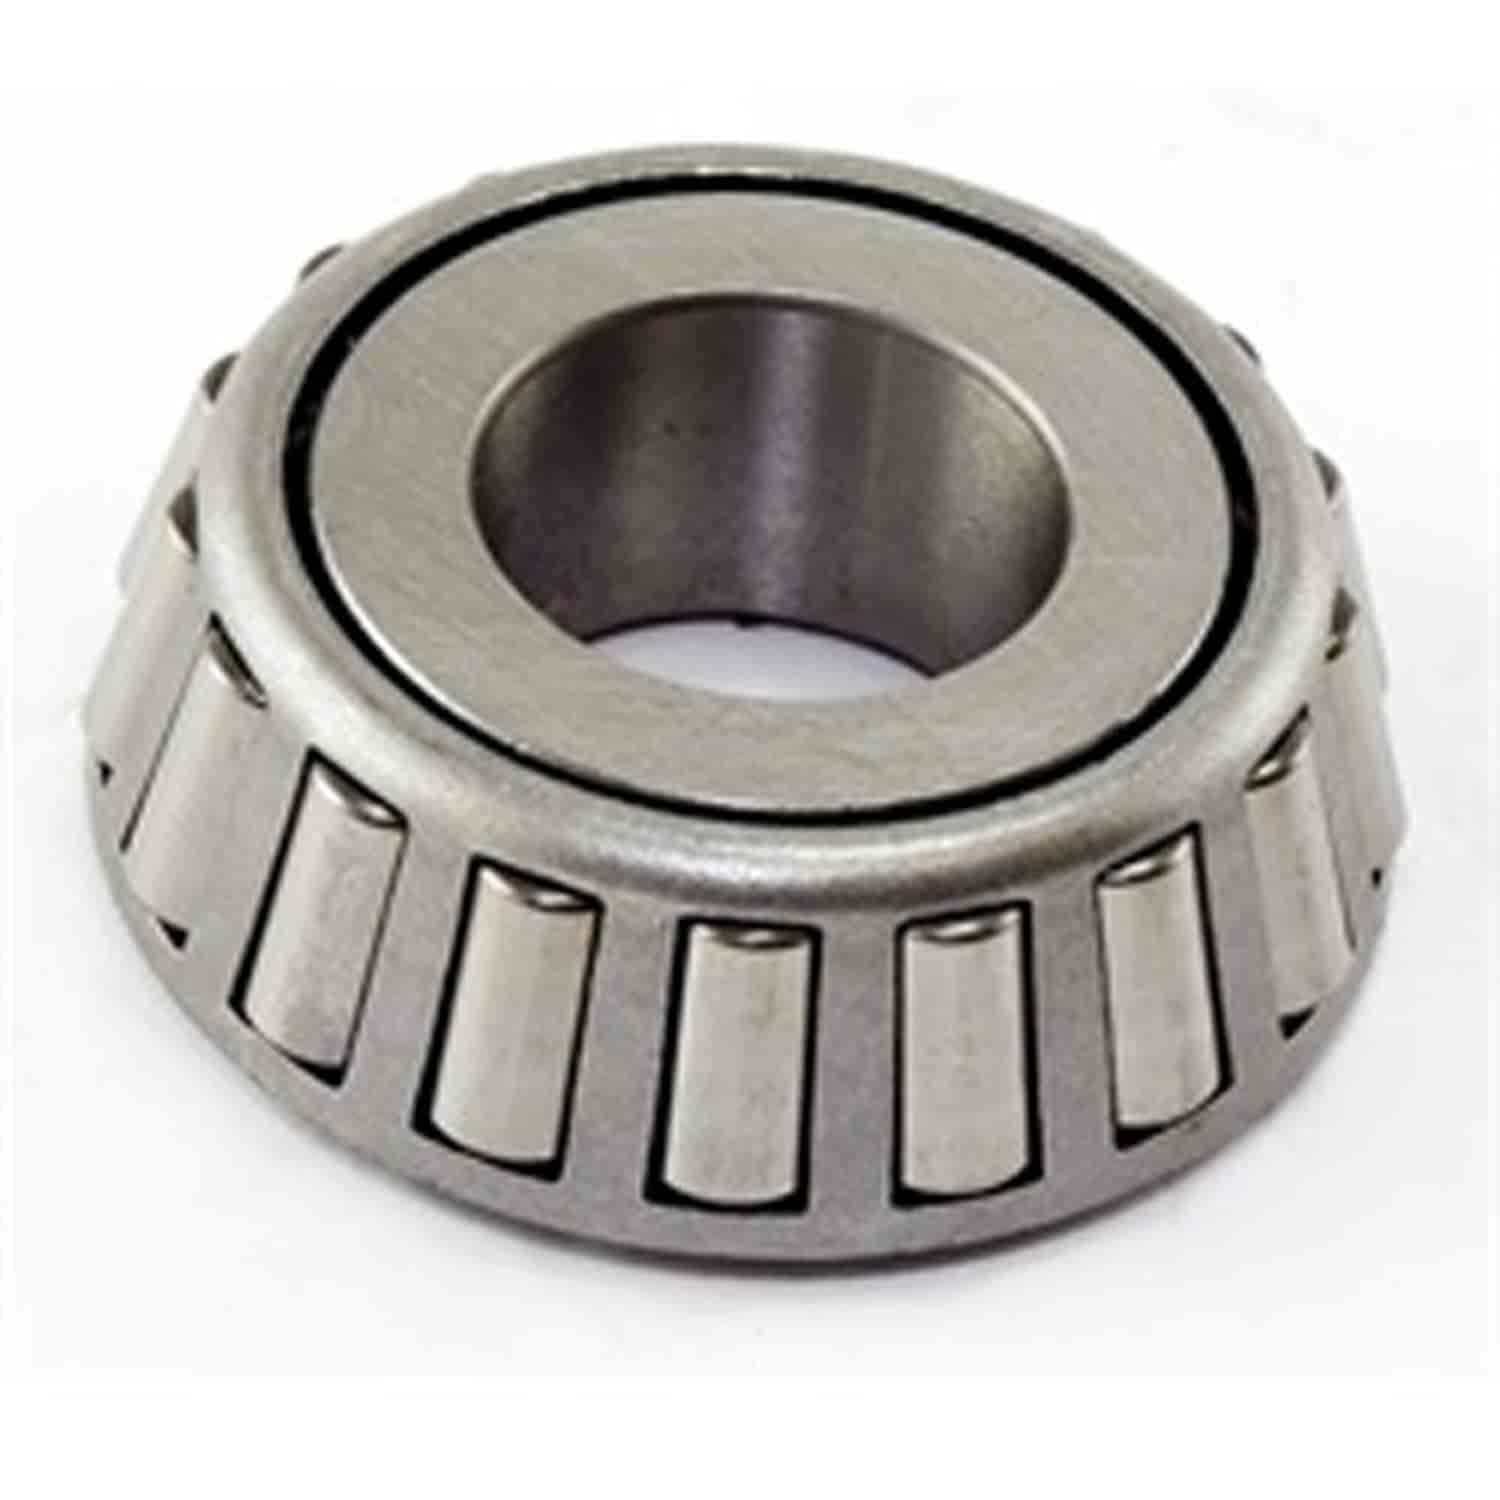 Outer Pinion Bearing Cup Jeep CJ3A 1948-1953 M38